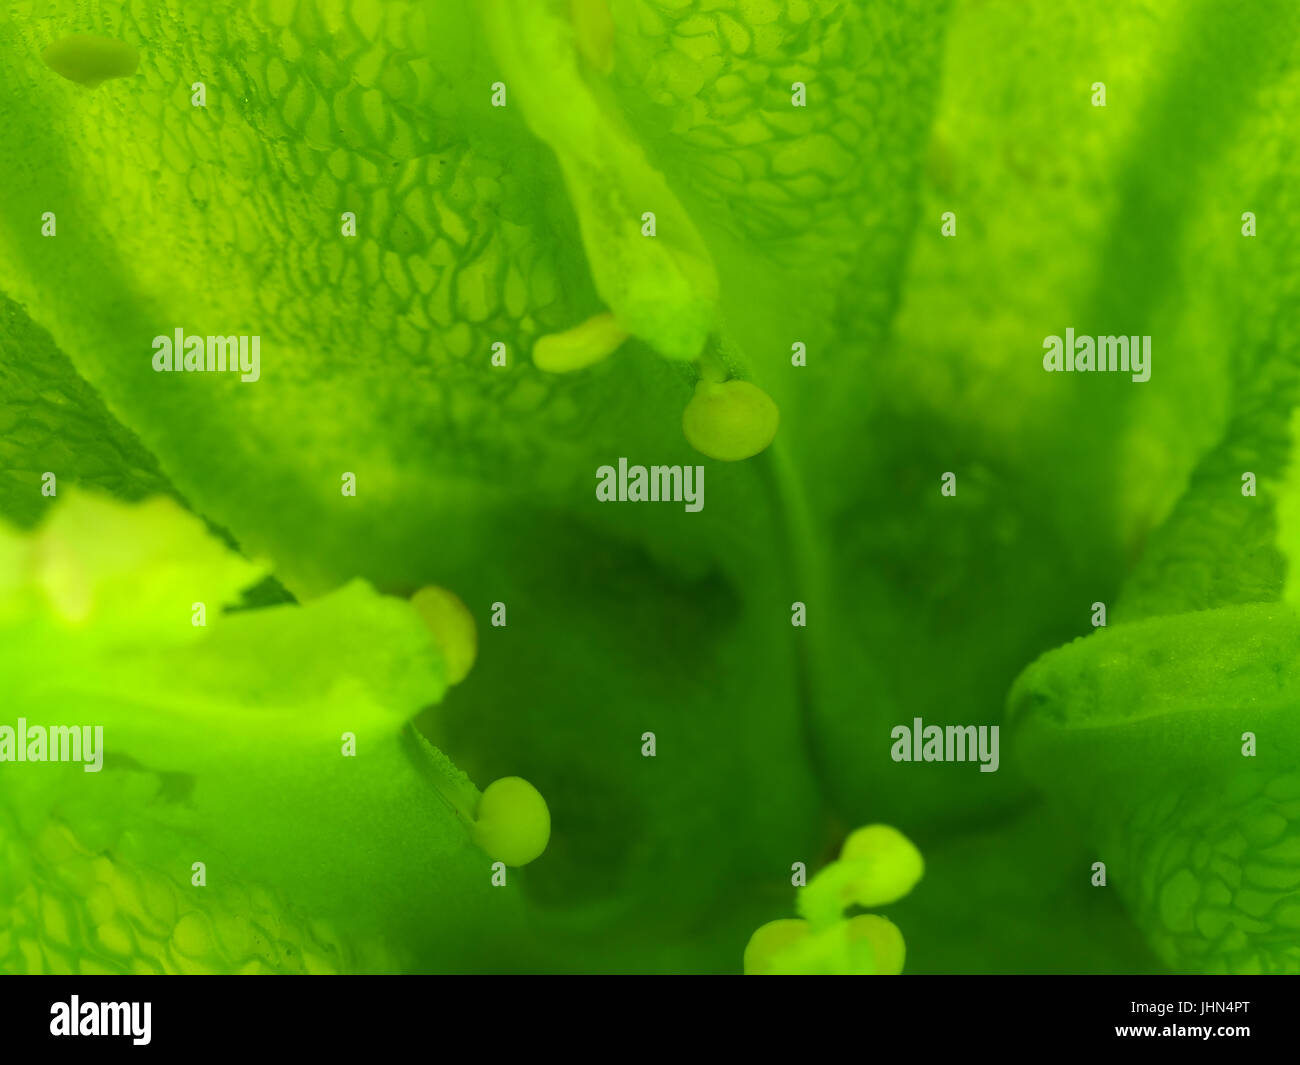 ABSTRACT BACKGROUND WITH GREEN PEPPER INNER VIEW  Abstract background created with an inner view of a green bell pepper. Macro shot. No color filters Stock Photo